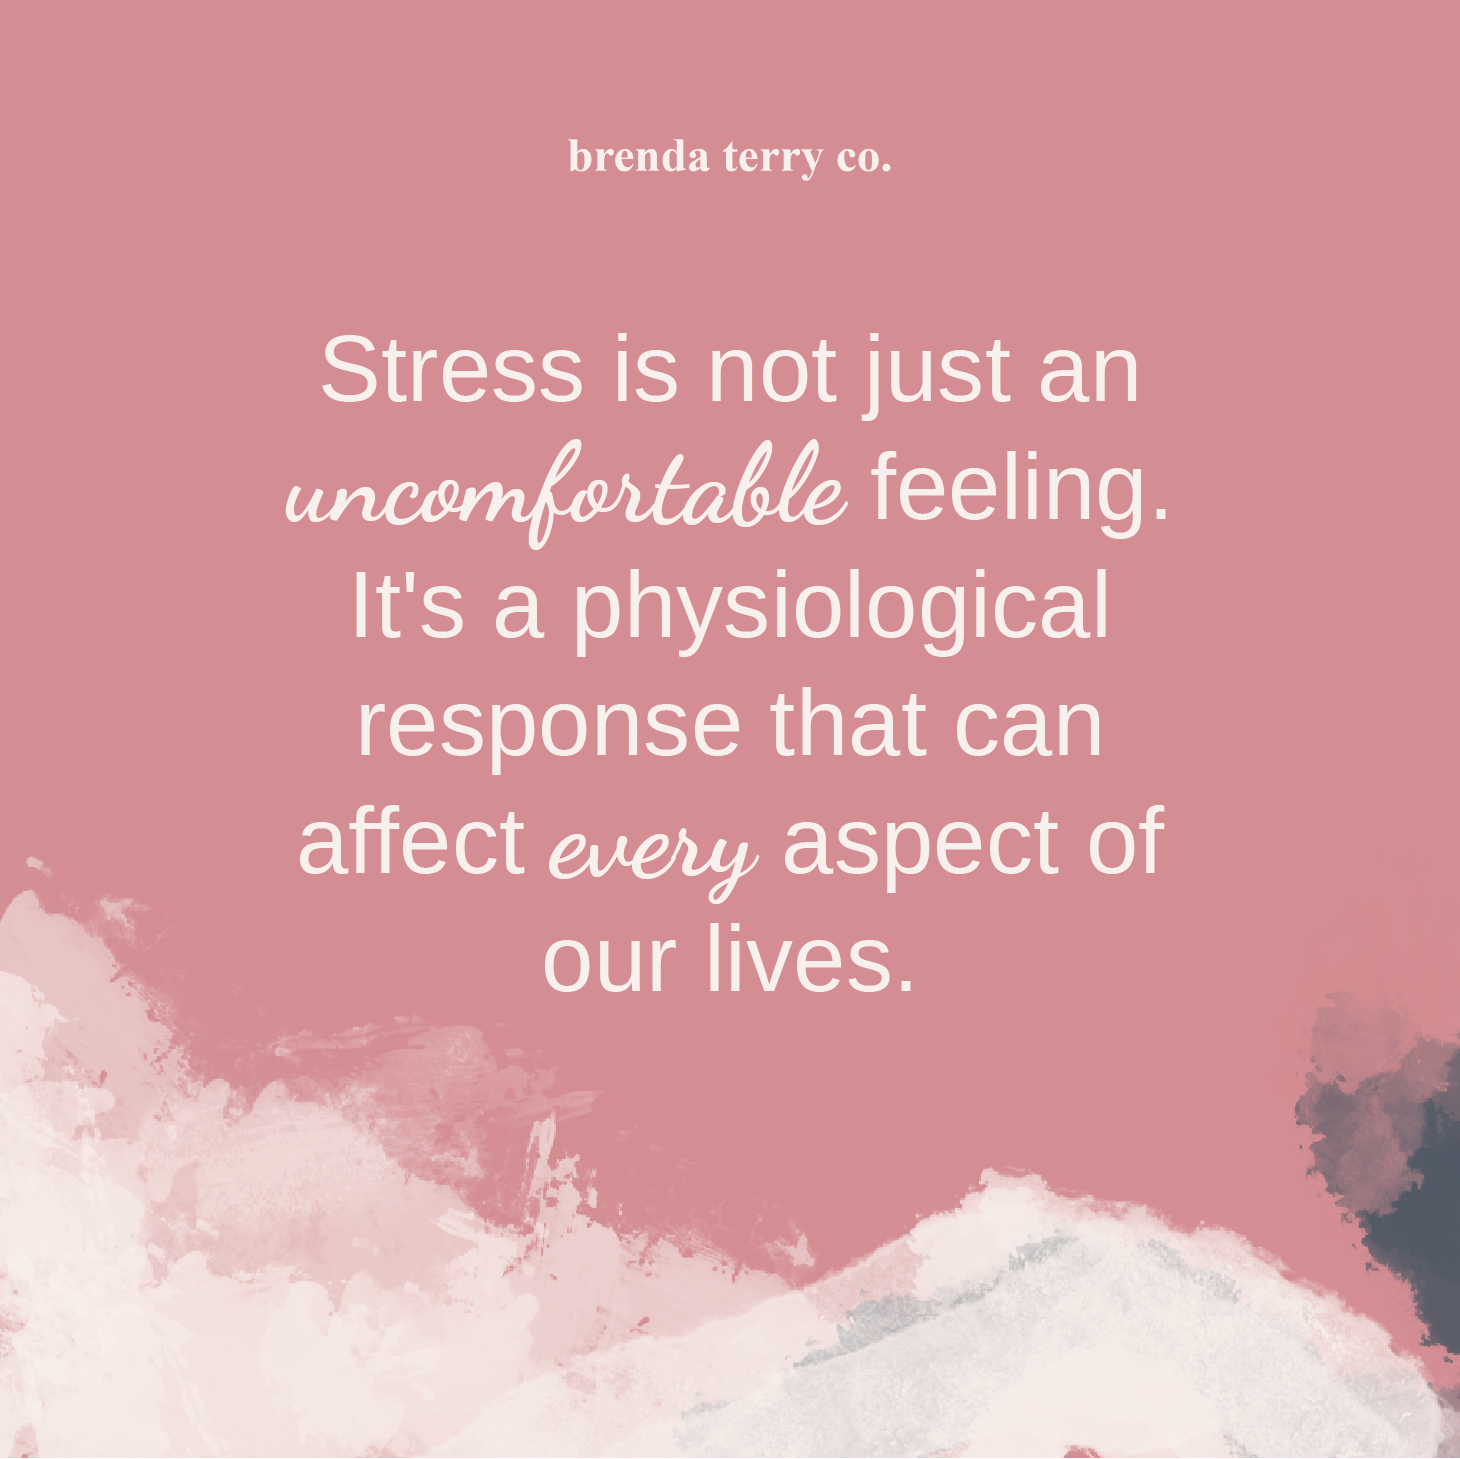 stress and anxiety quote